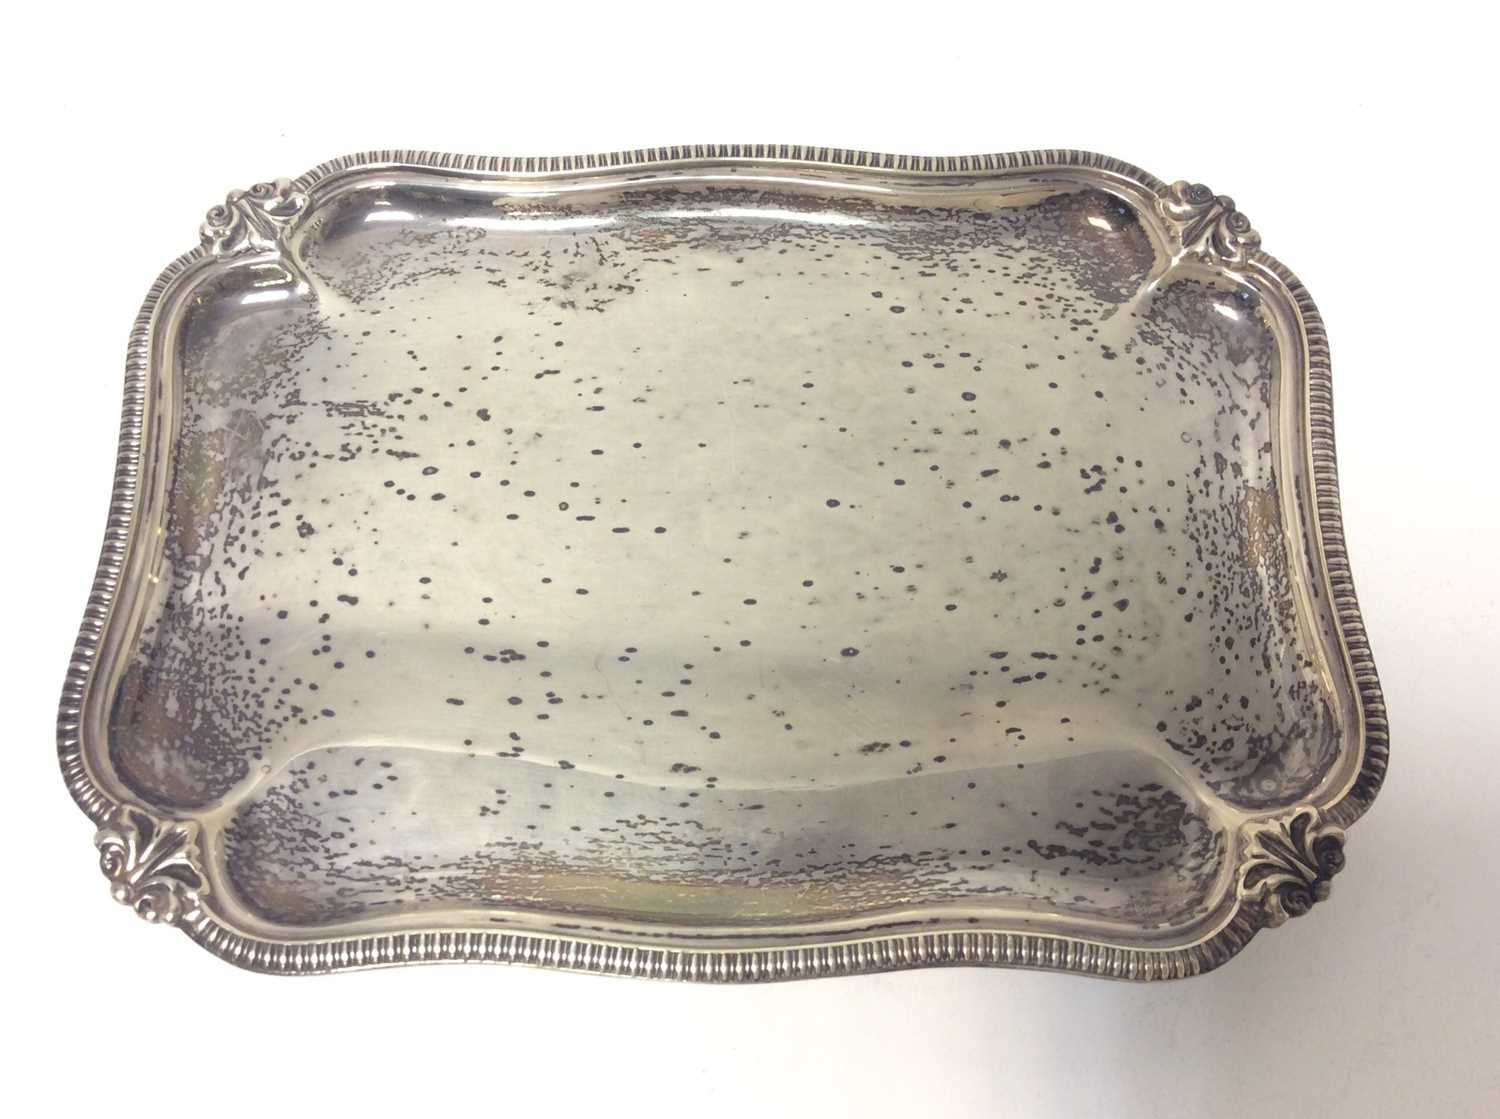 Lot 183 - George V silver waiter of rectangular form with gadrooned and scroll borders, raised on four scroll feet, (Sheffield 1926), maker Harrison Brothers & Howson, all at approximately 13oz, 20cm in leng...